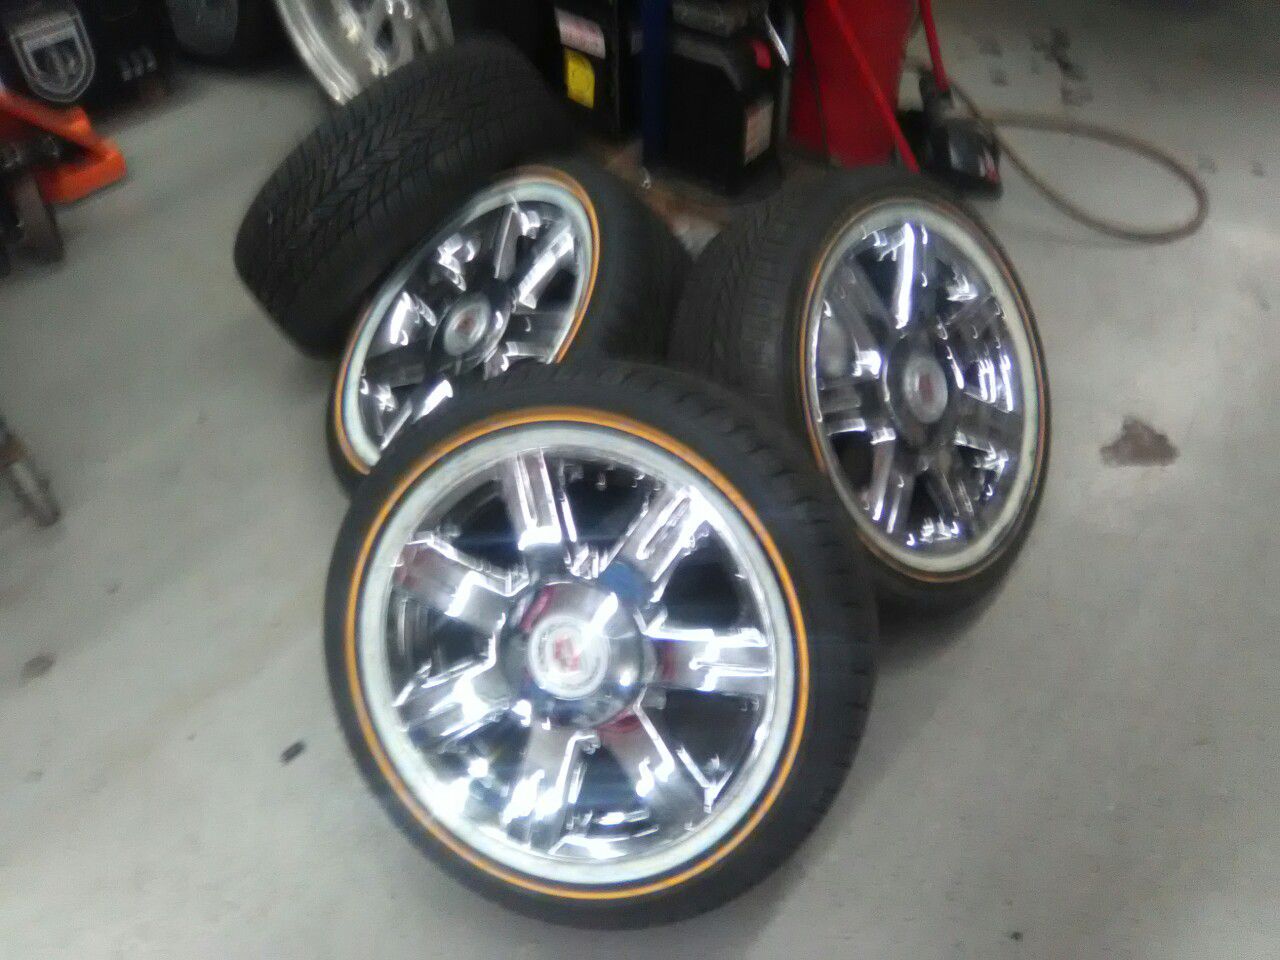 Brand new 17 inch vogues and dts rims